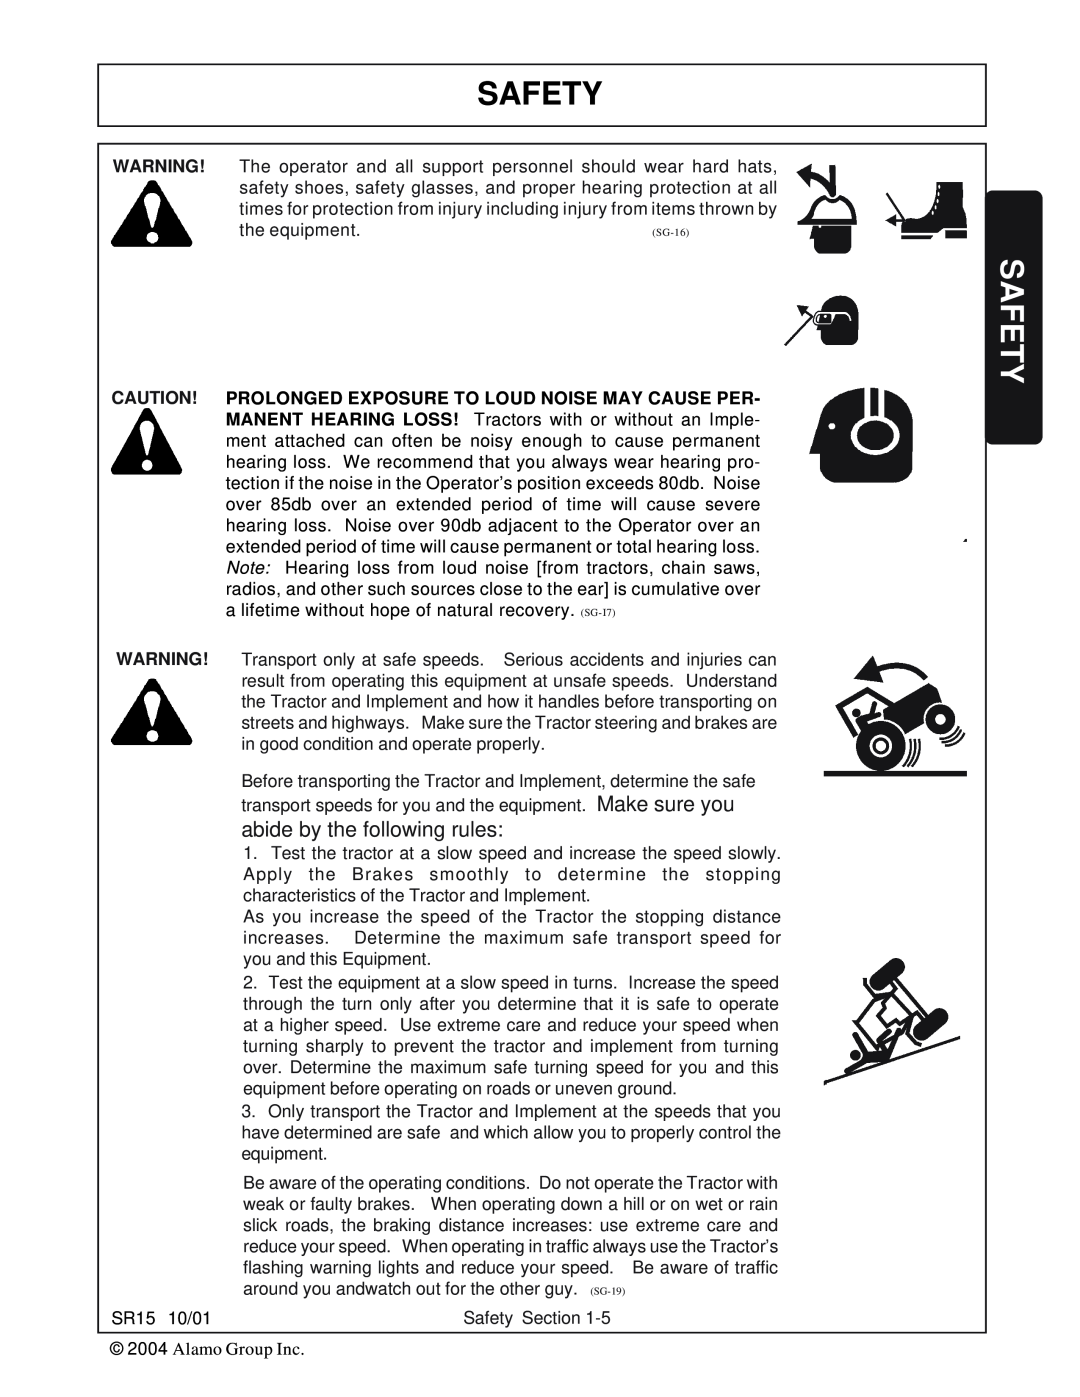 Servis-Rhino SR15M, SR10M manual Safety, abide by the following rules 